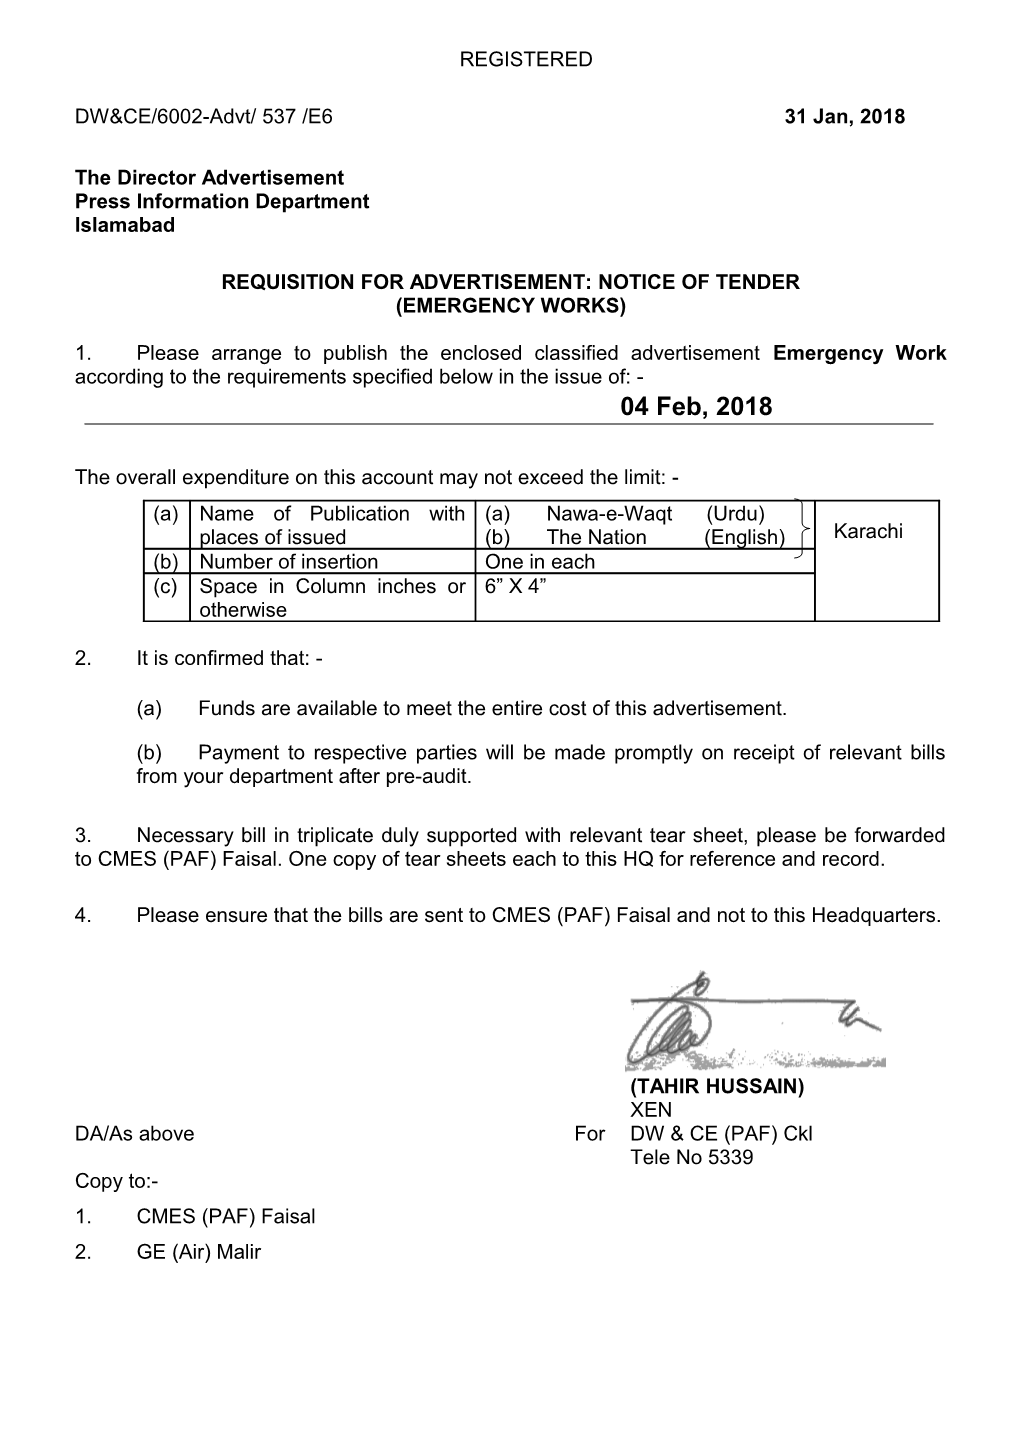 Requisition for Advertisement: Notice of Tender